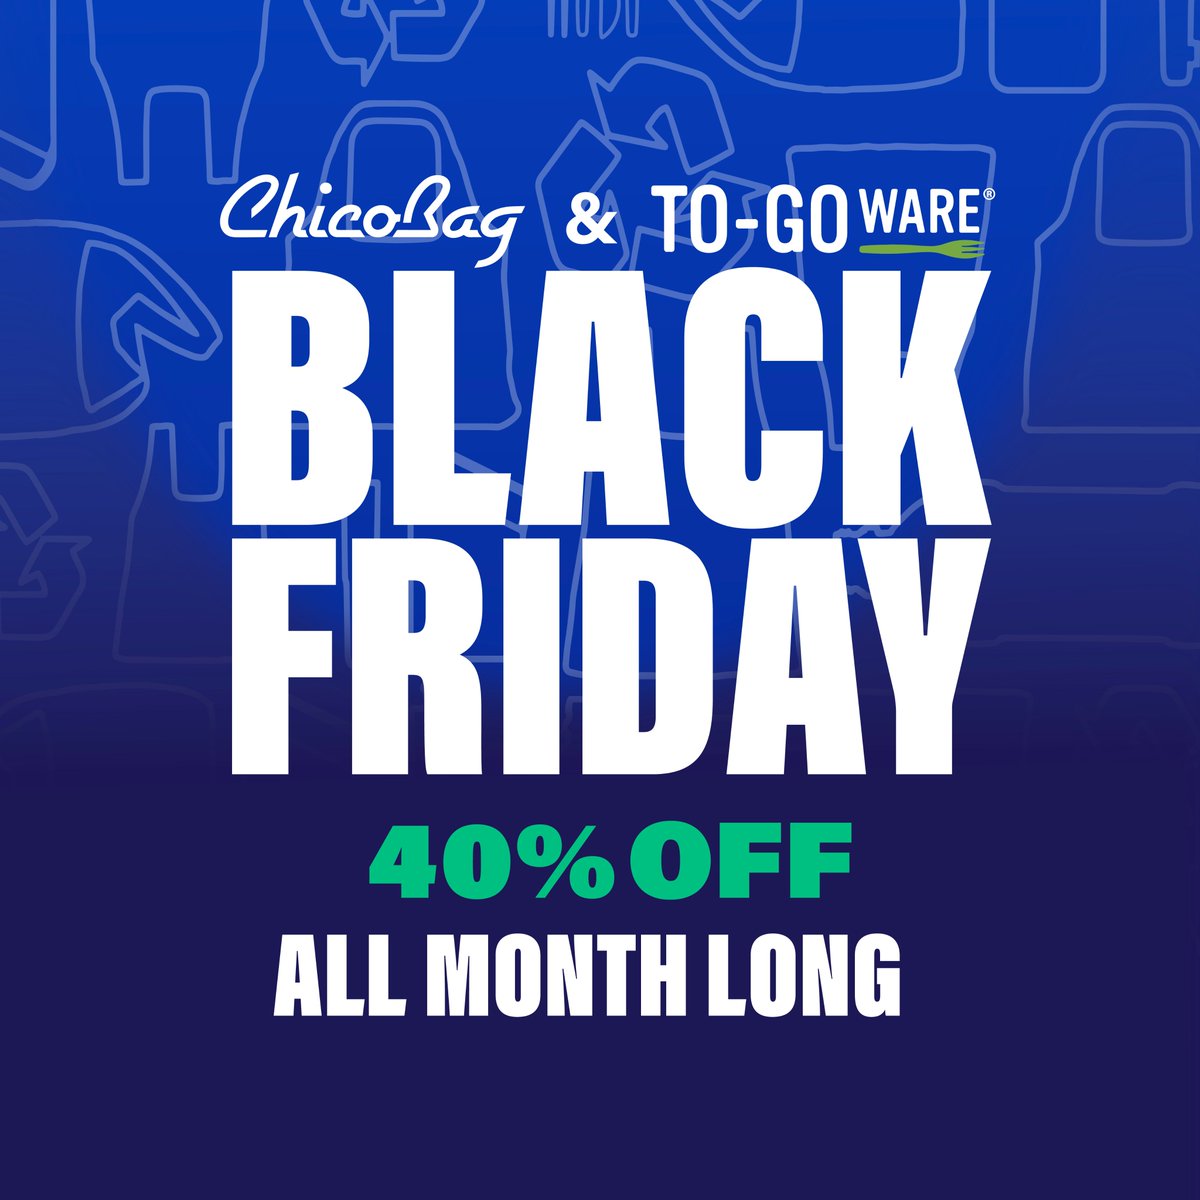 Black Friday goes all month long at ChicoBag! But instead of standing in line for the perfect gifts, try the best thing since pizza in bed—ChicoBag's 40% off Black Friday sale! Shop: tinyurl.com/vs2yw6az #littlebitbetter #holidays #gift #chicobag #lbbtip #blackfriday